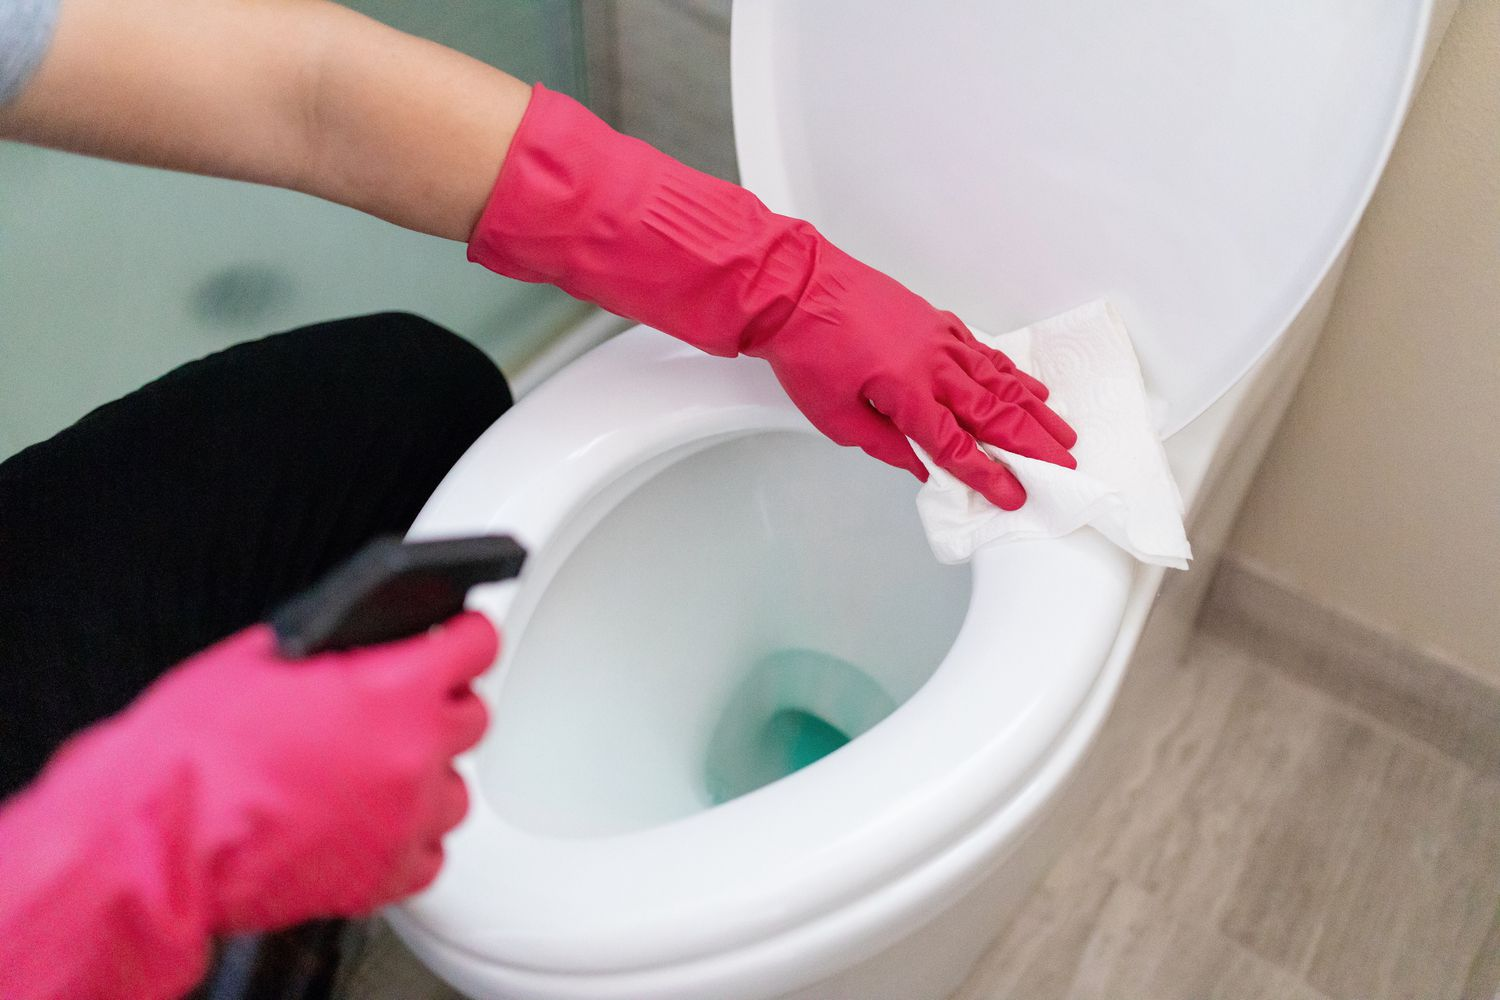 Spray the toilet seat with a toilet bowl cleaner